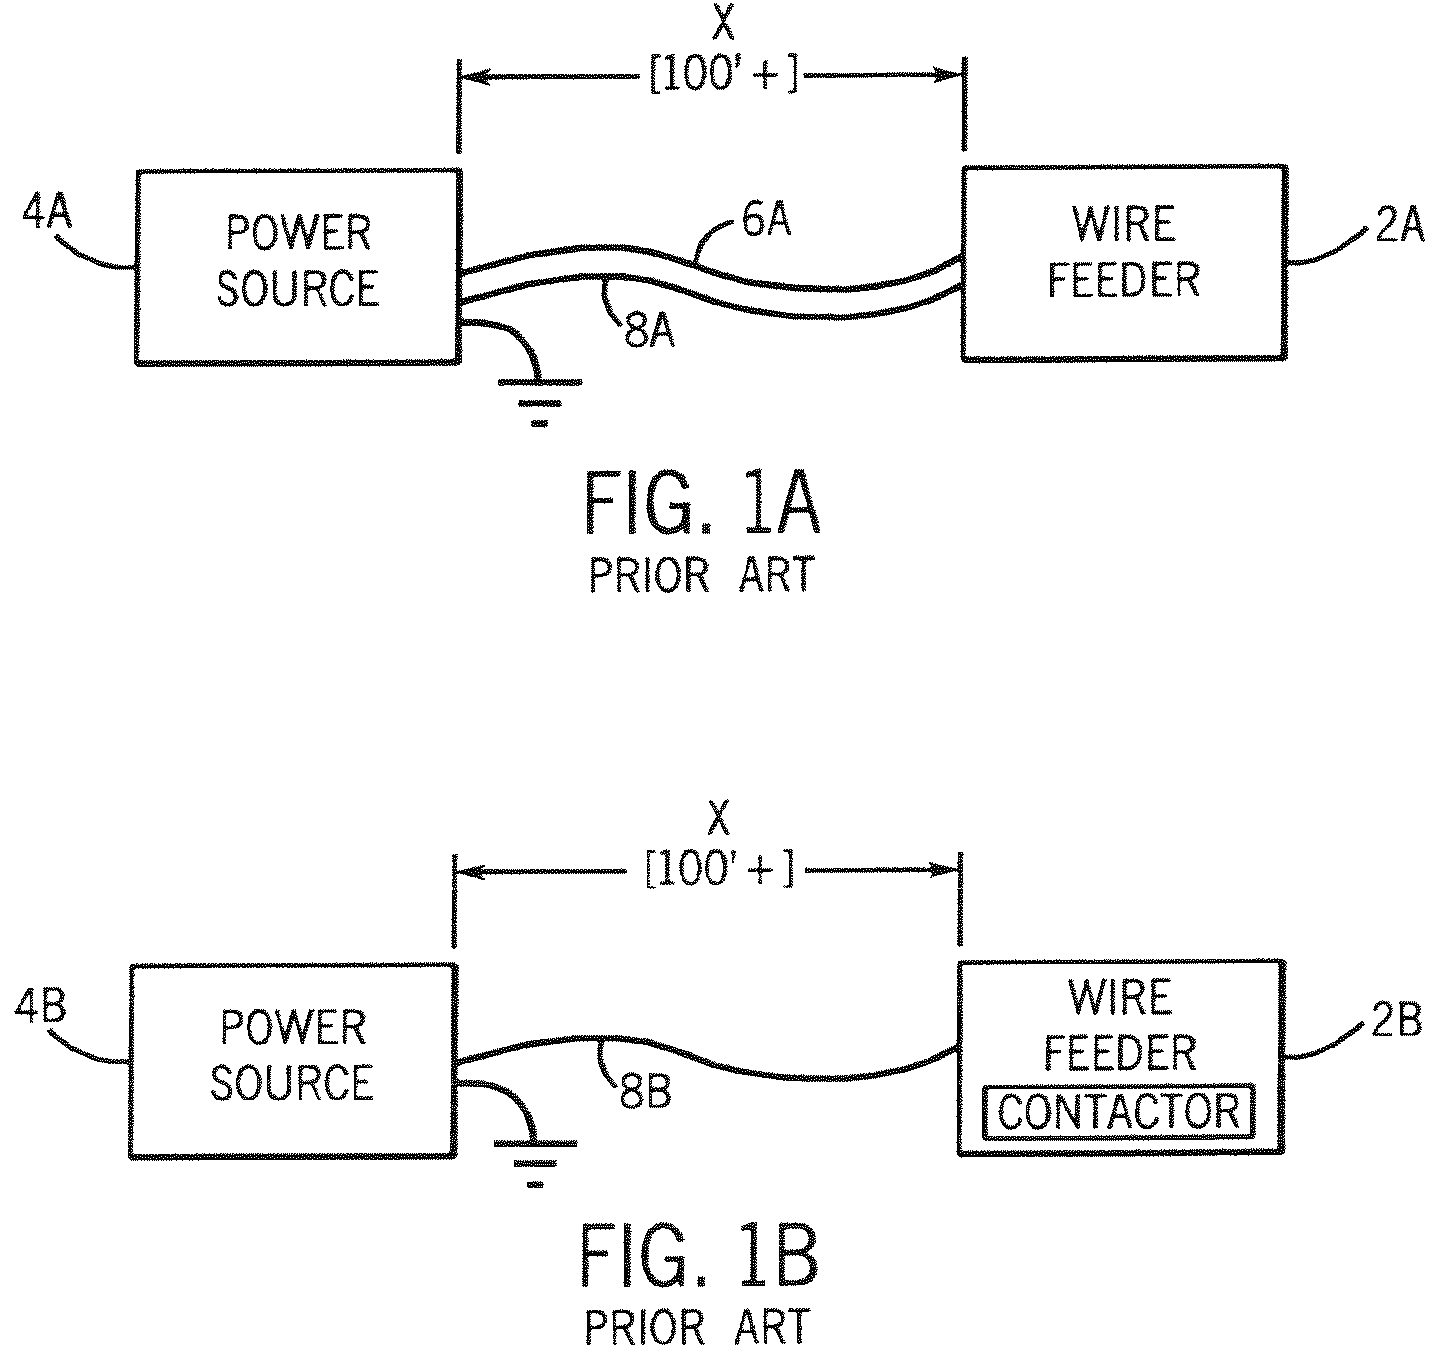 Method and system for a remote wire feeder where standby power and system control are provided via weld cables